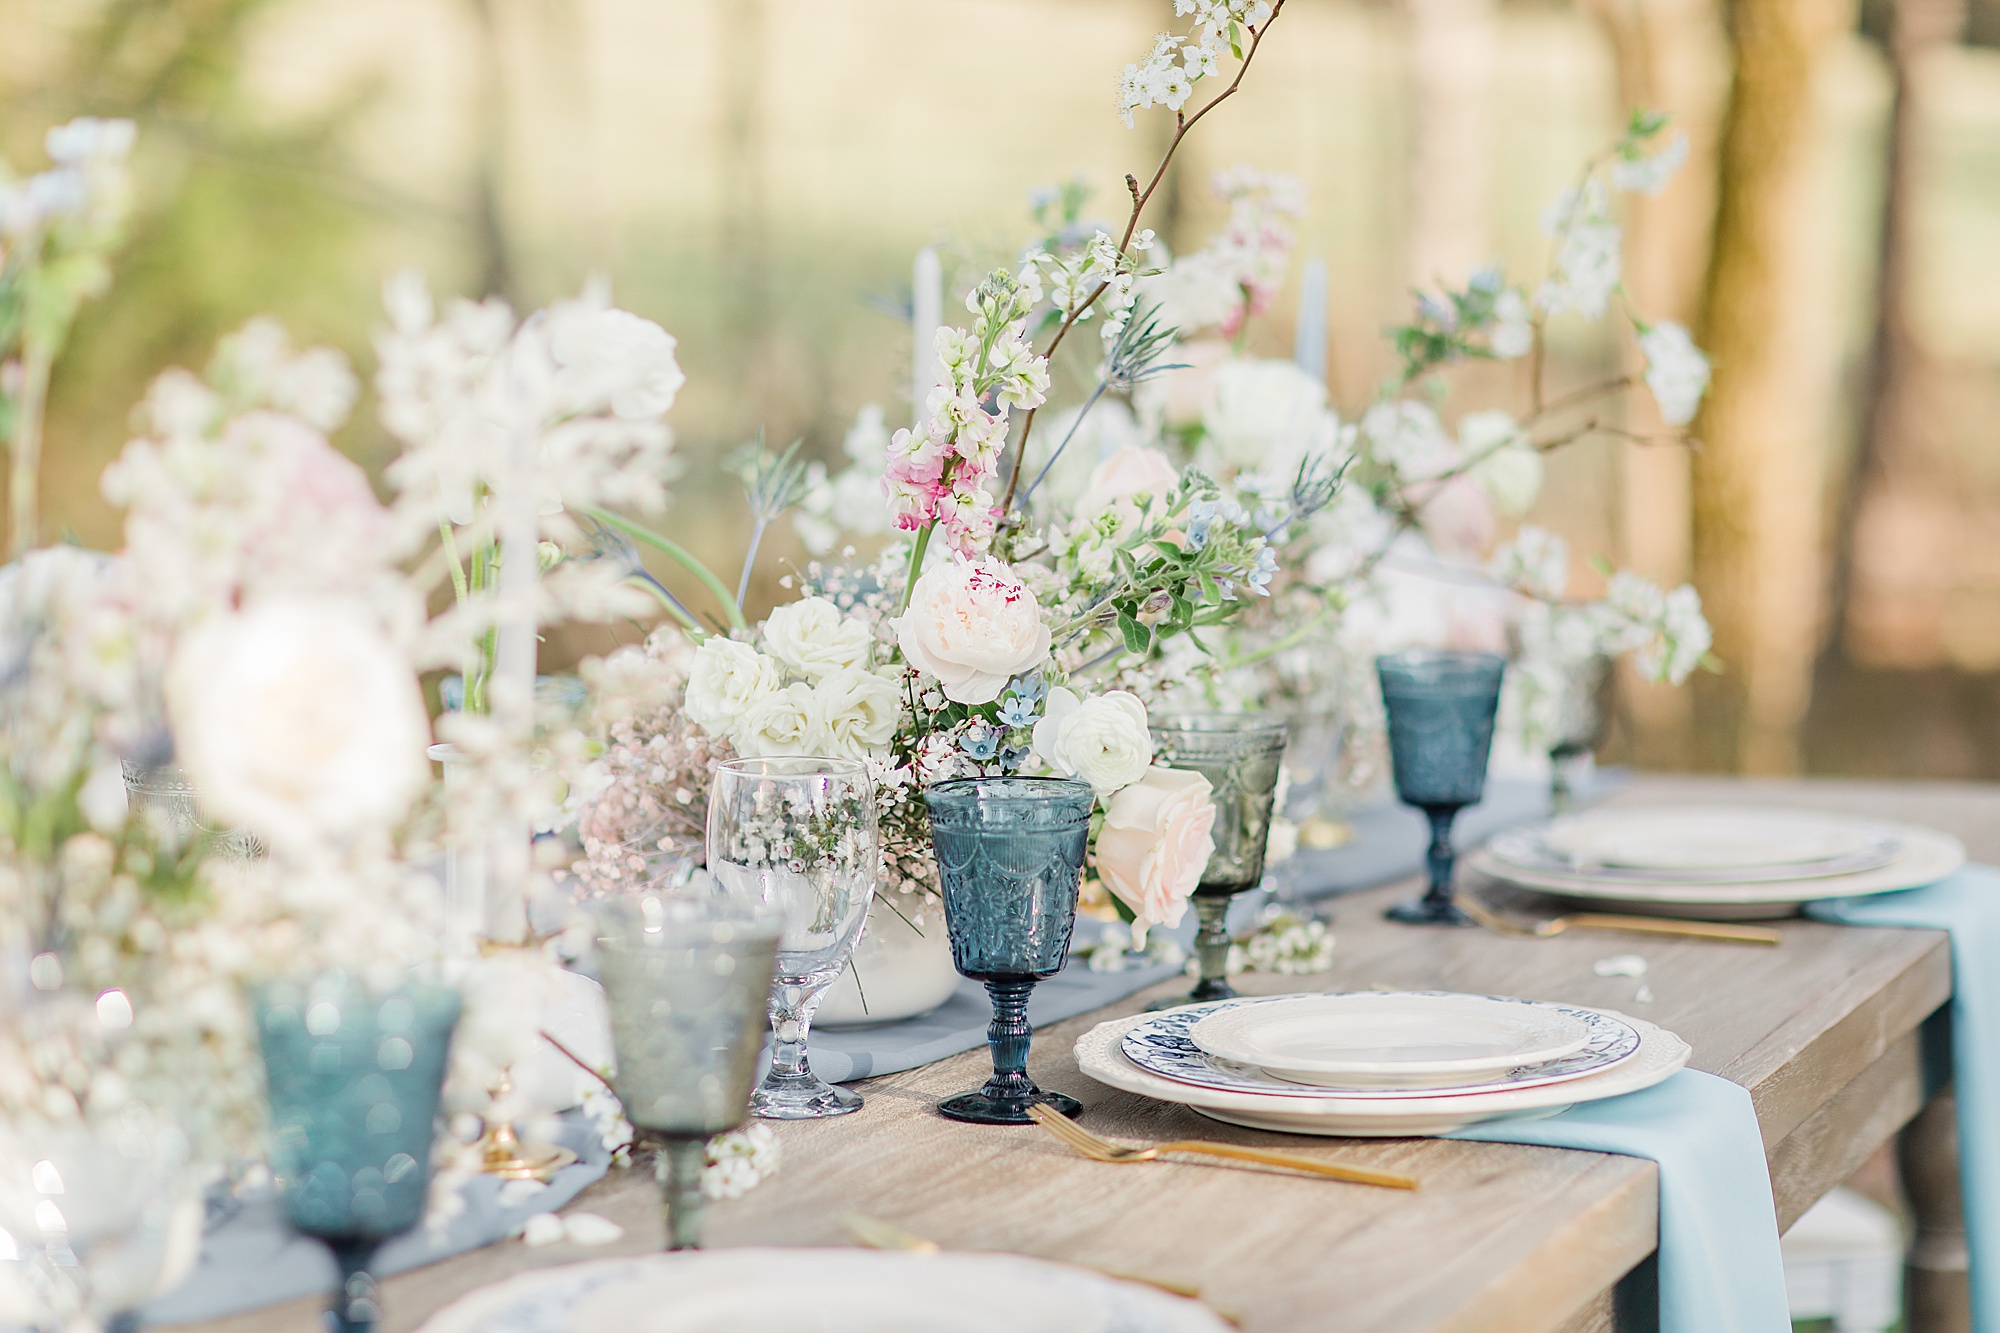 place settings for rustic wedding reception